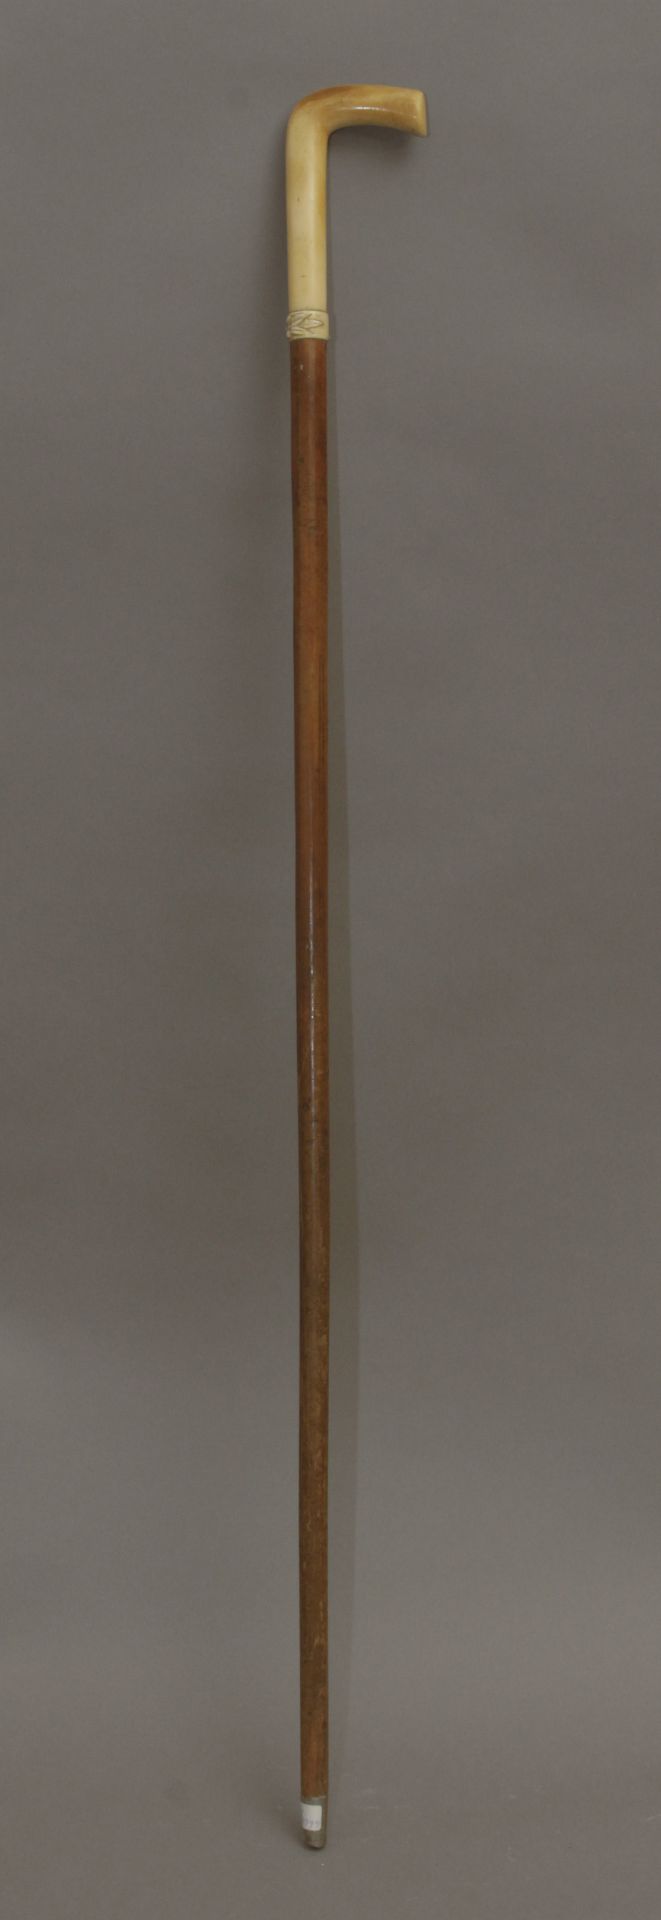 A first half of 20th century walking stick - Image 2 of 7